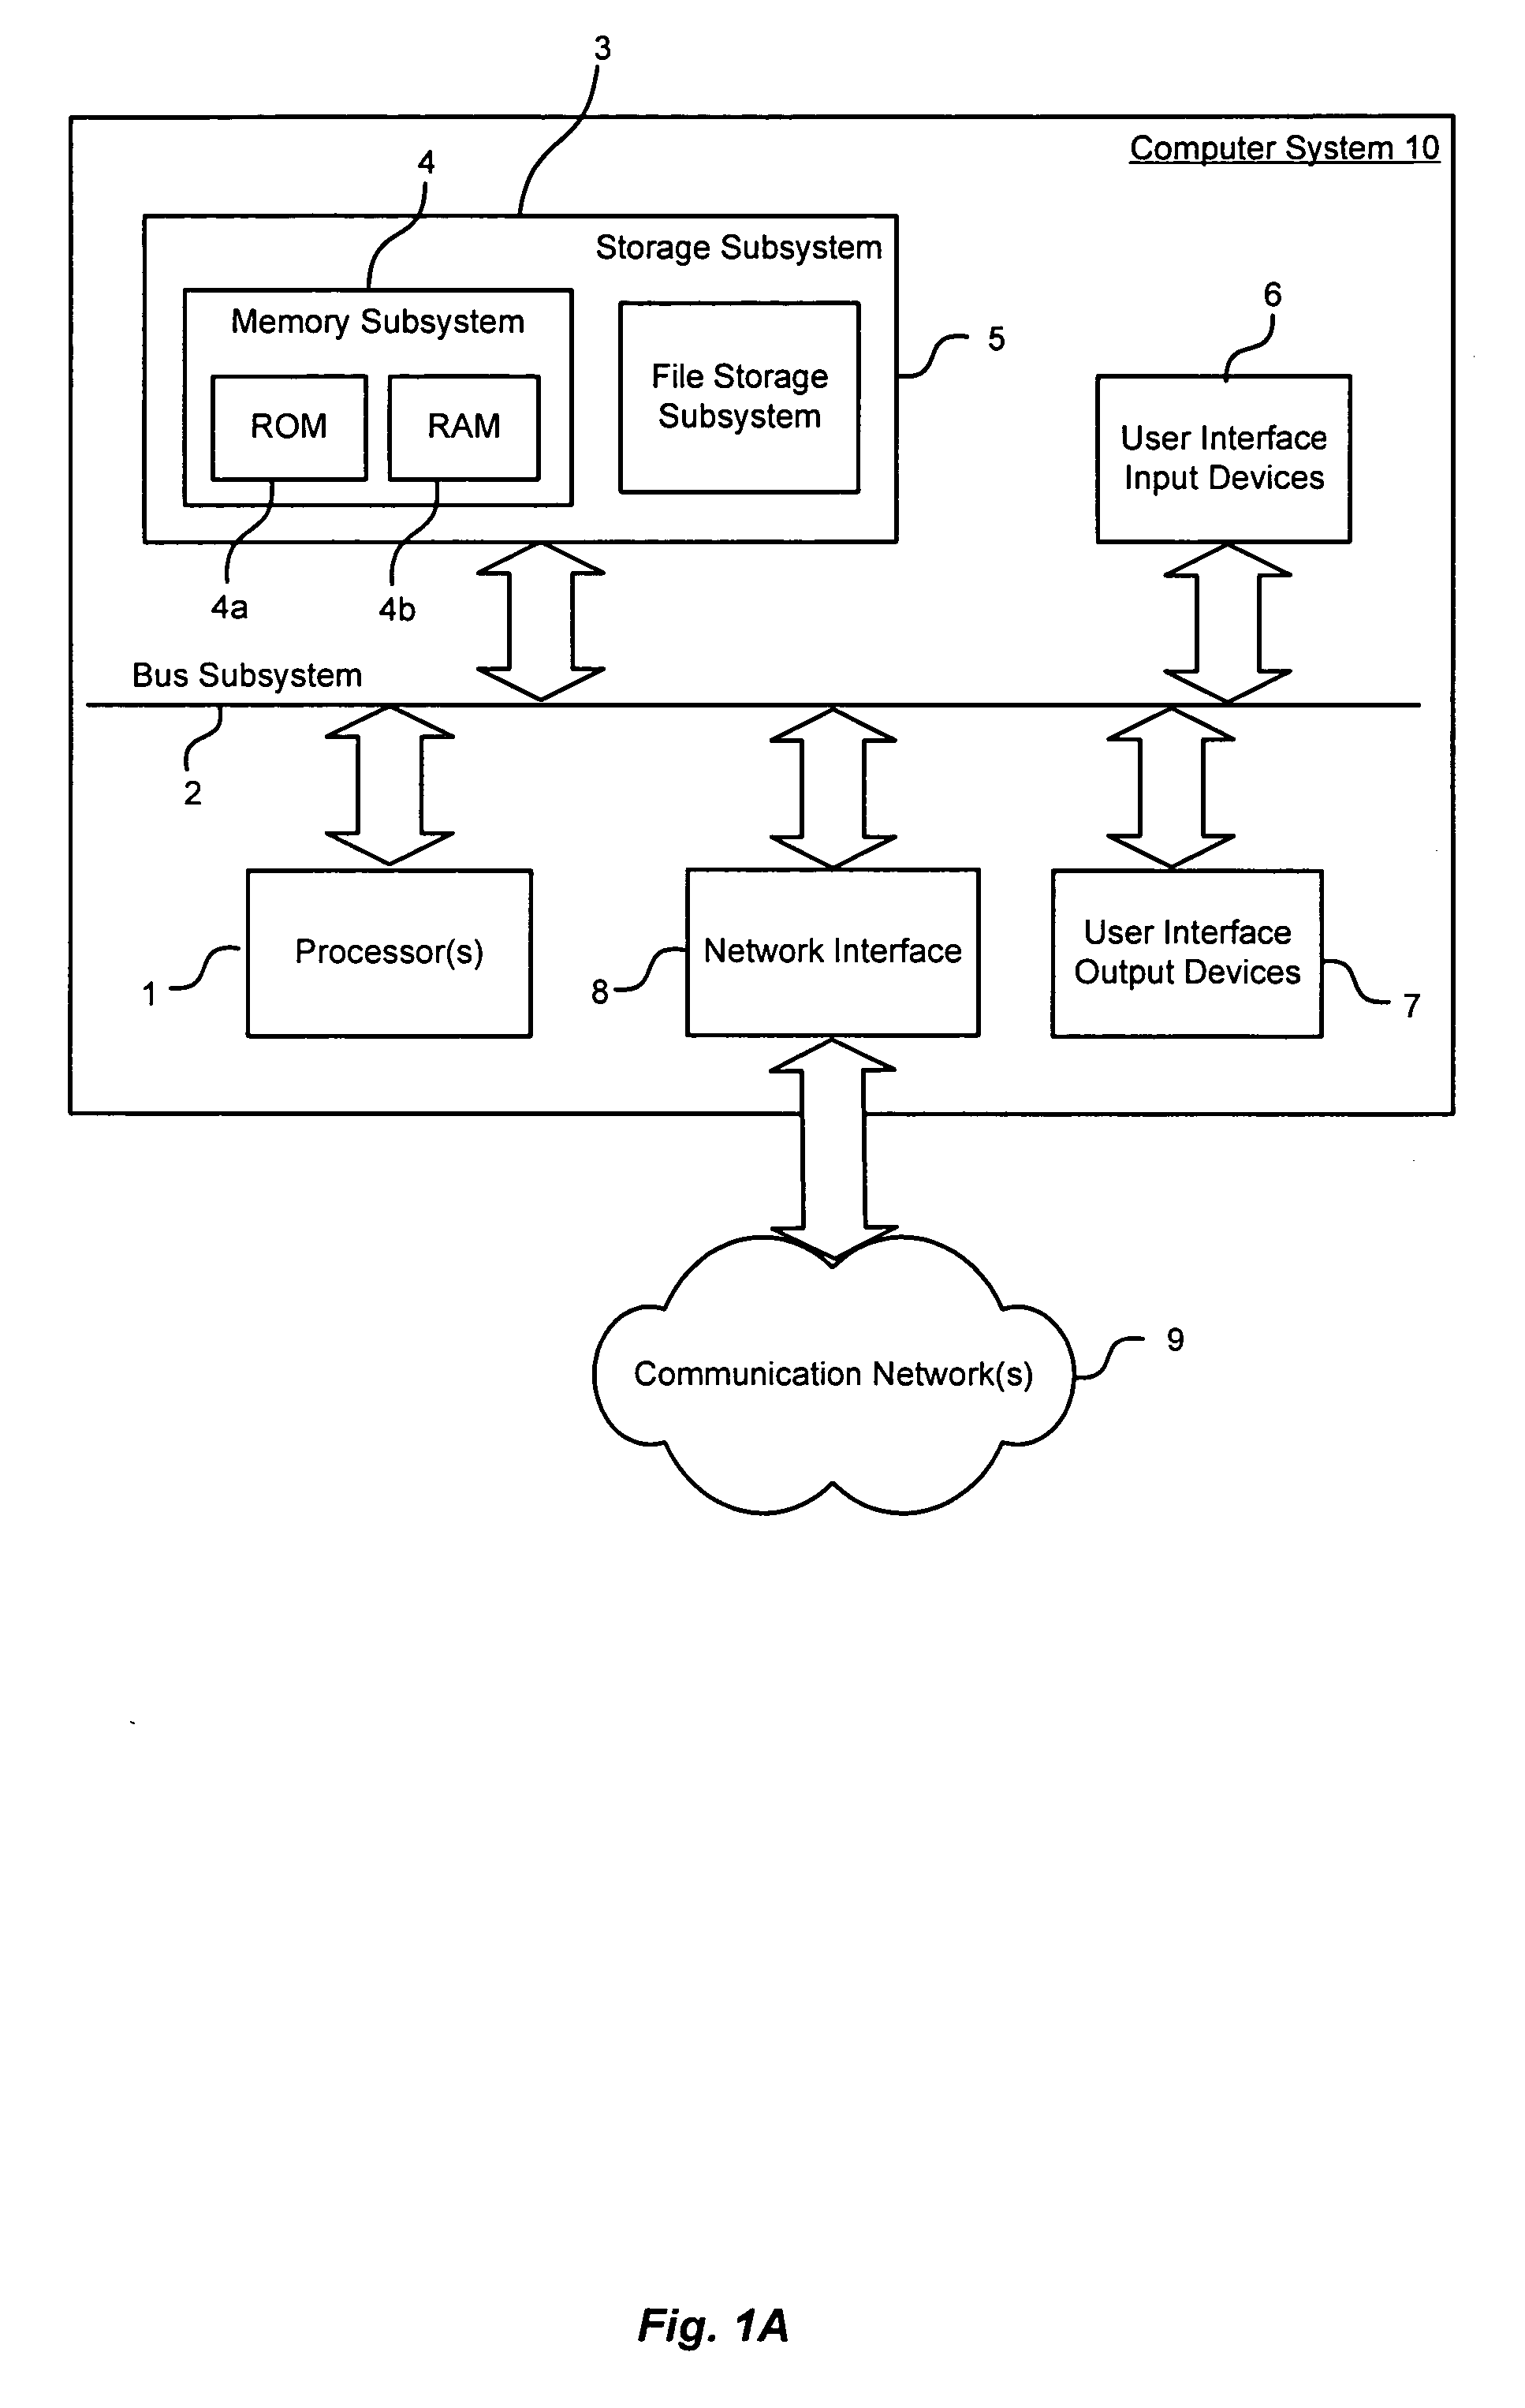 Method of and system for creating queries that operate on unstructured data stored in a database